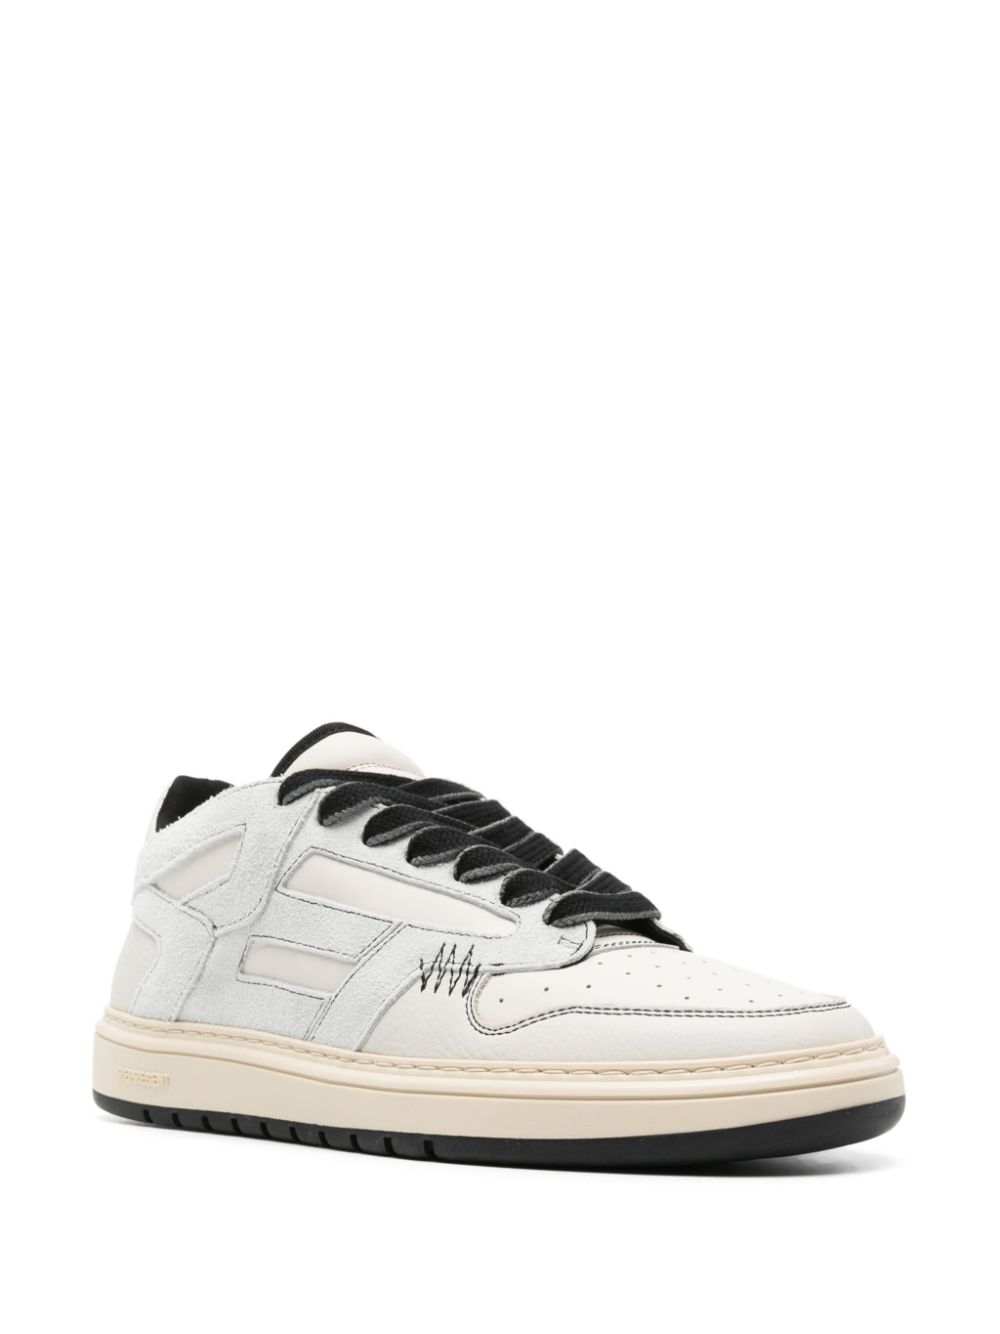 Image 2 of Represent Reptor lace-up sneakers